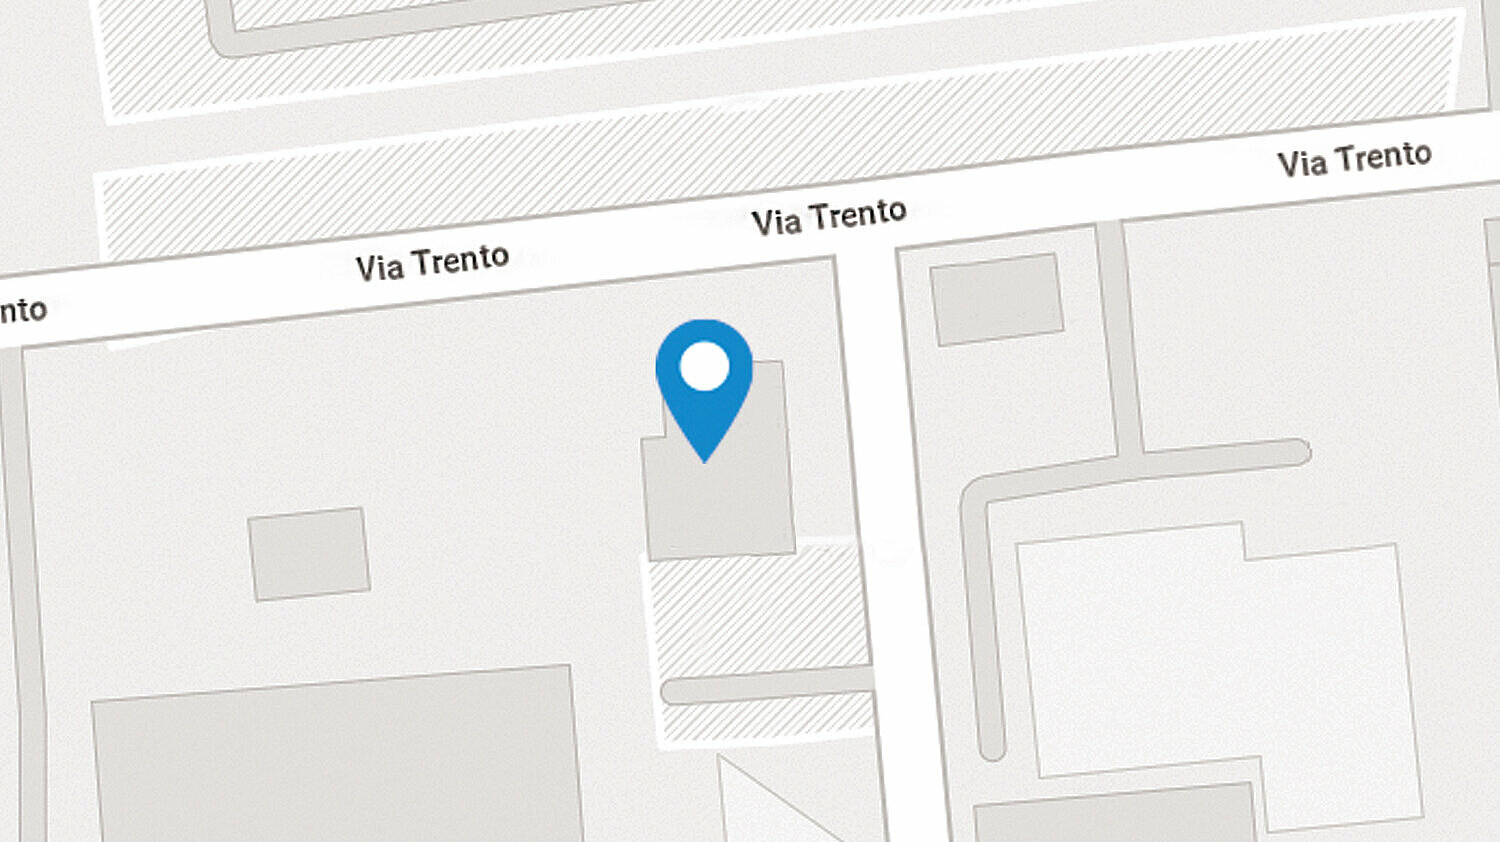 Map with SIKO Italia's location in Rho, Milan